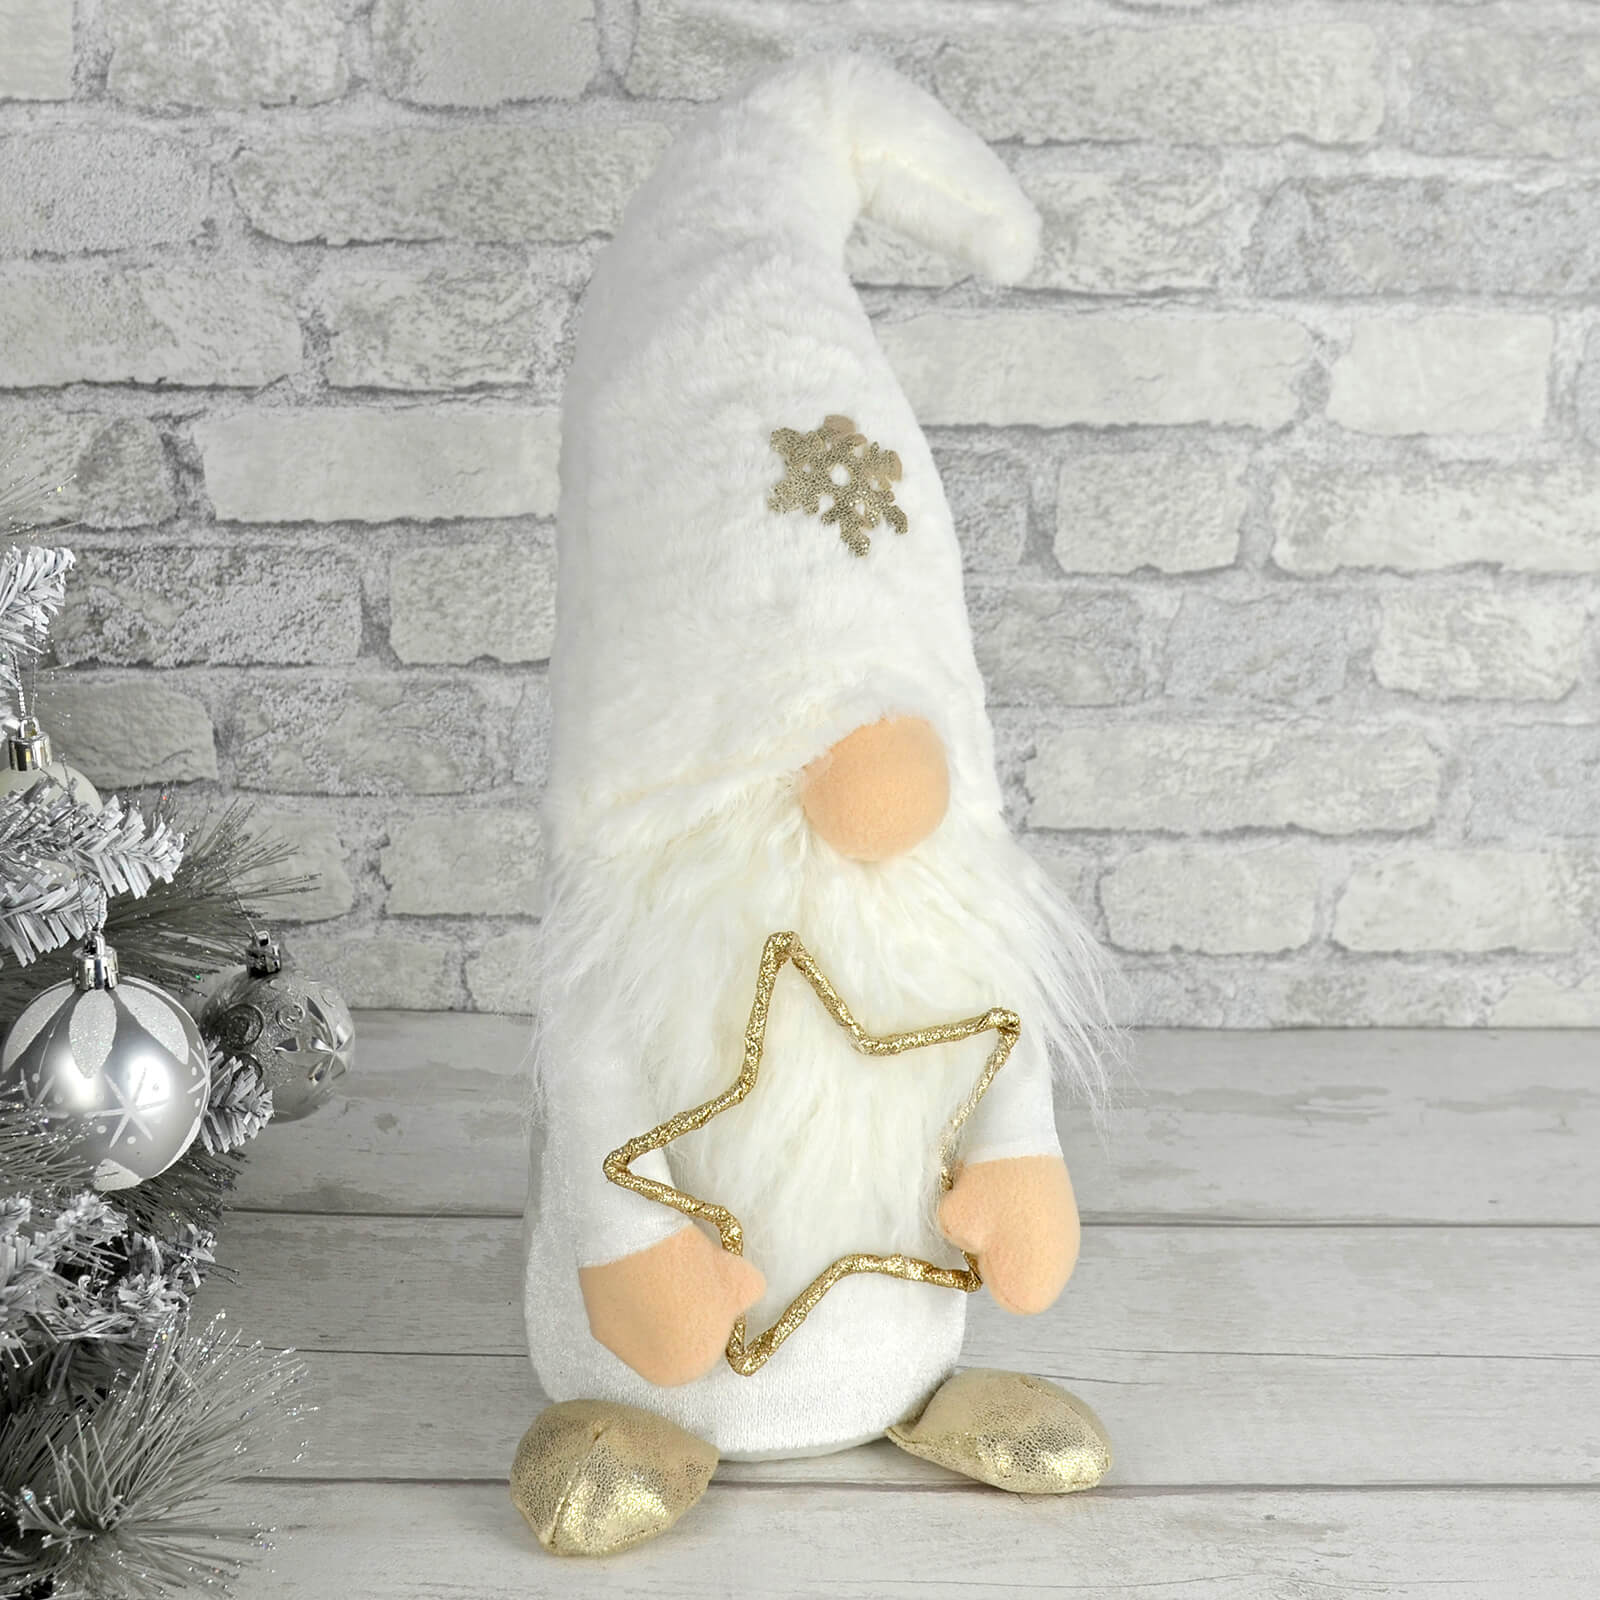 White fabric Christmas gonk figure decoration with gold glitter star standing on a wooden table beside a silver Christmas tree